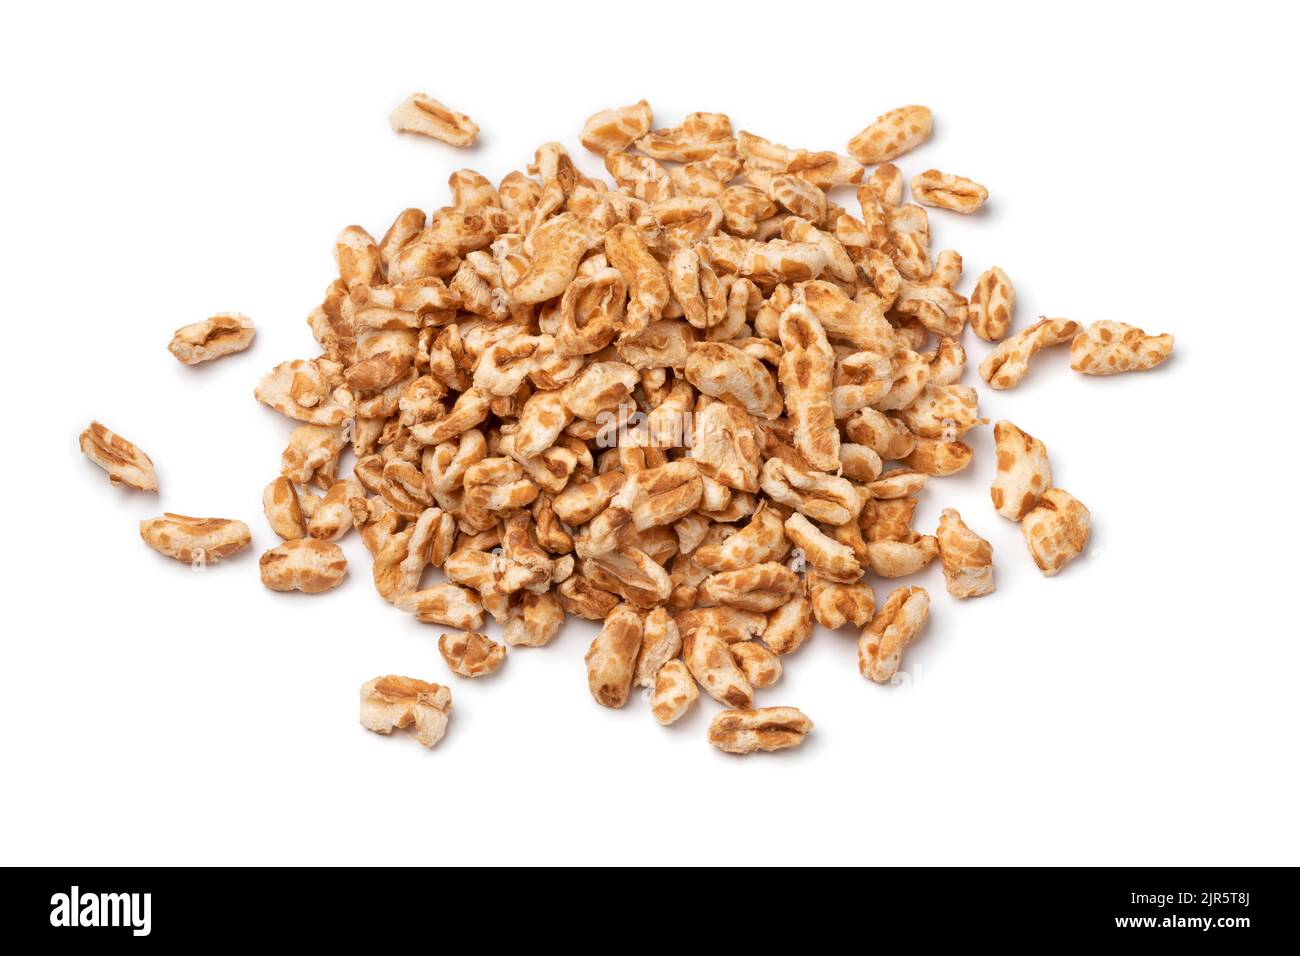 Heap of puffed oat close up isolated on white background Stock Photo